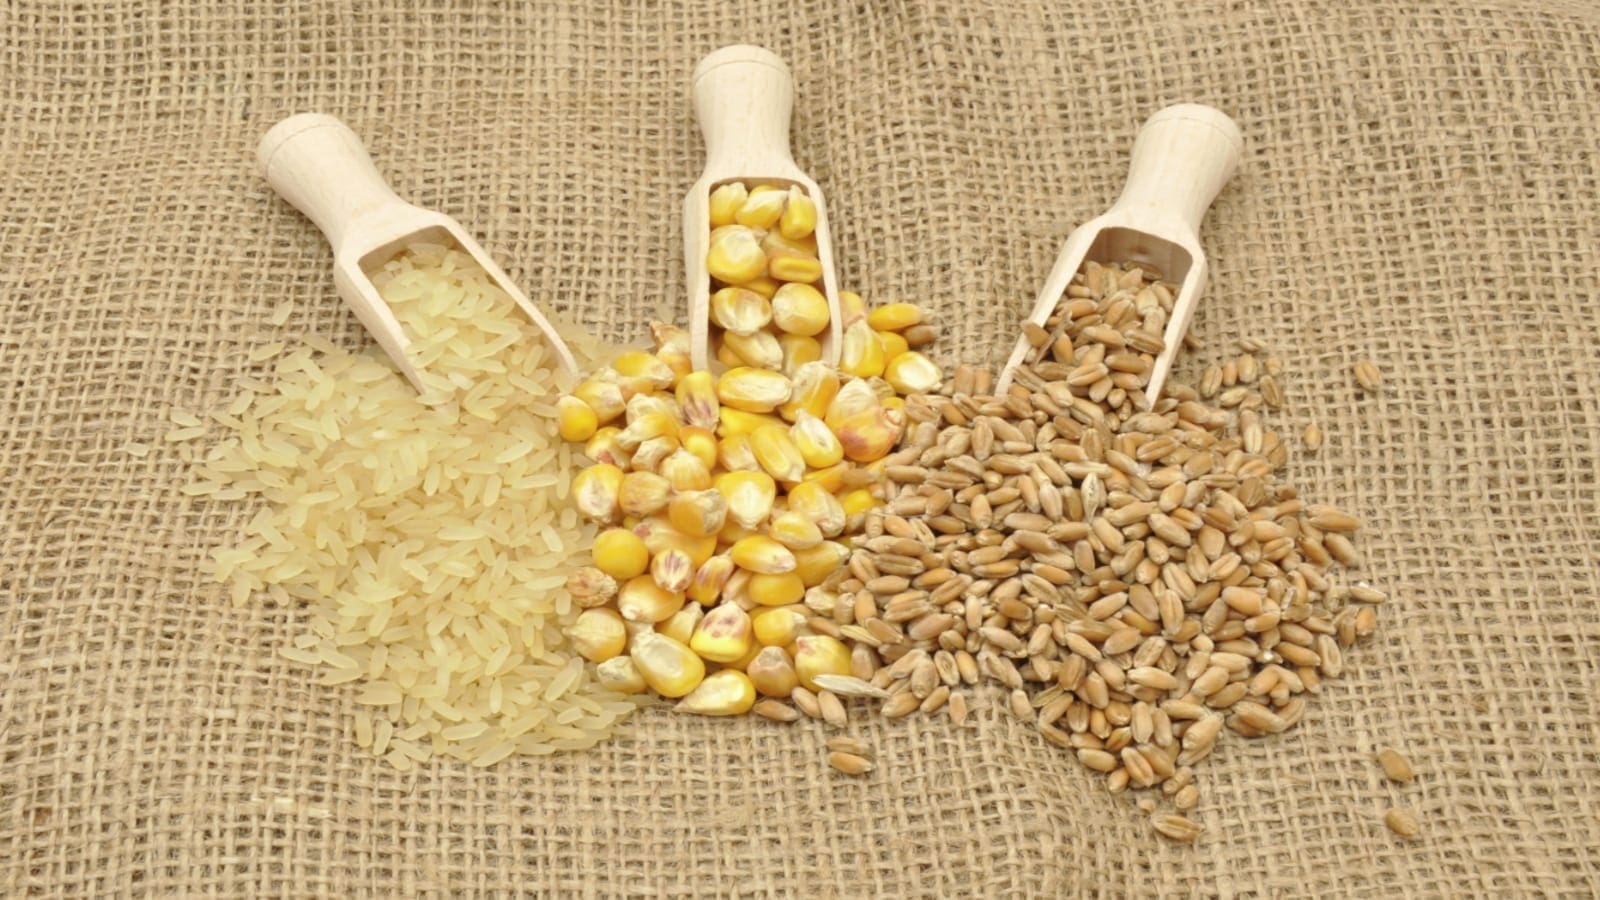 Nigeria to continue relying on grain imports despite imposed restrictions